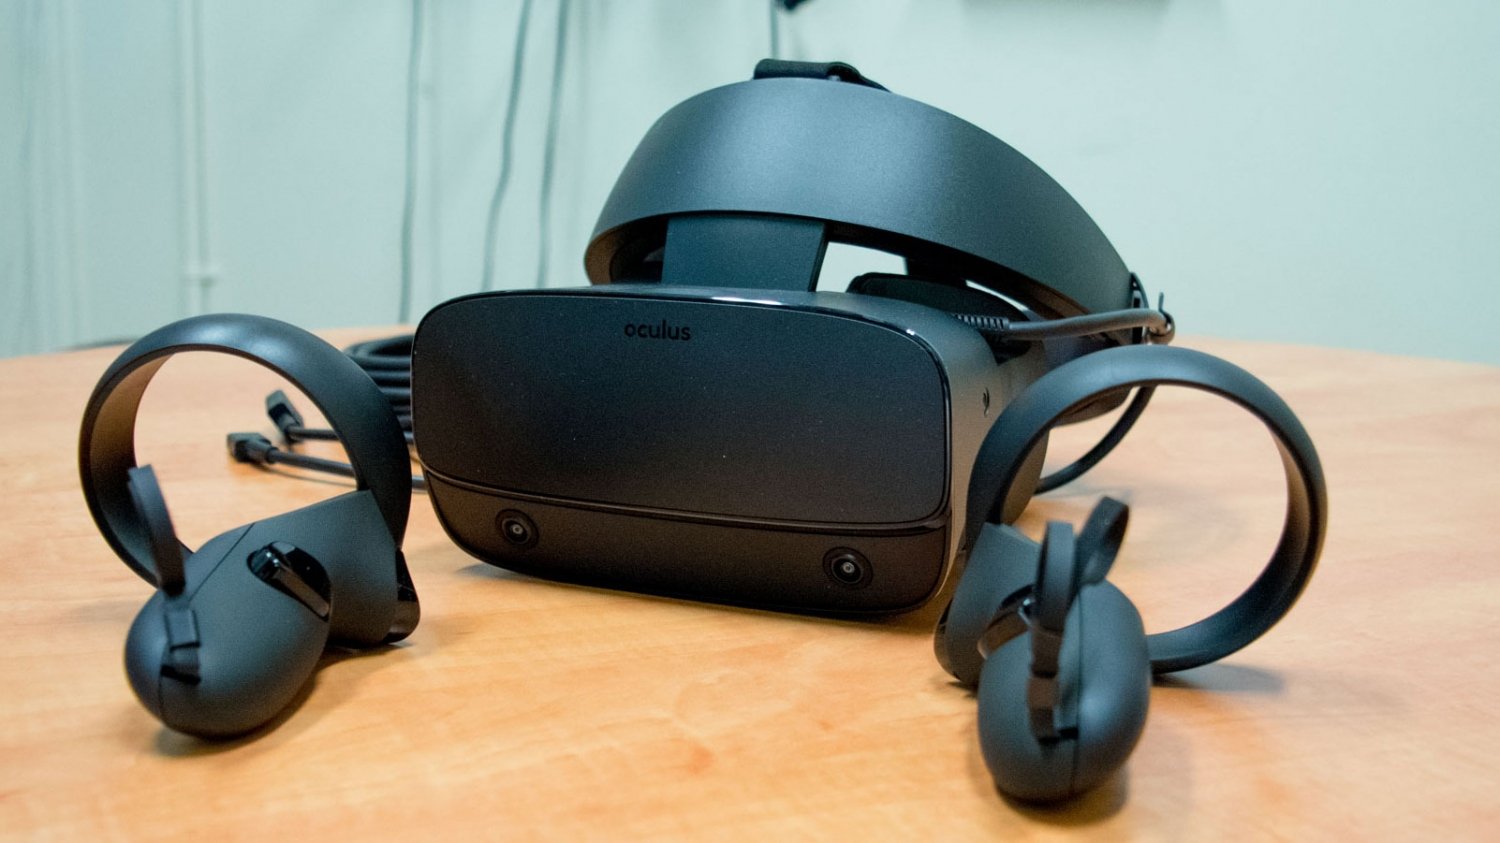 Rift S is the last PCVR headset from the Oculus brand